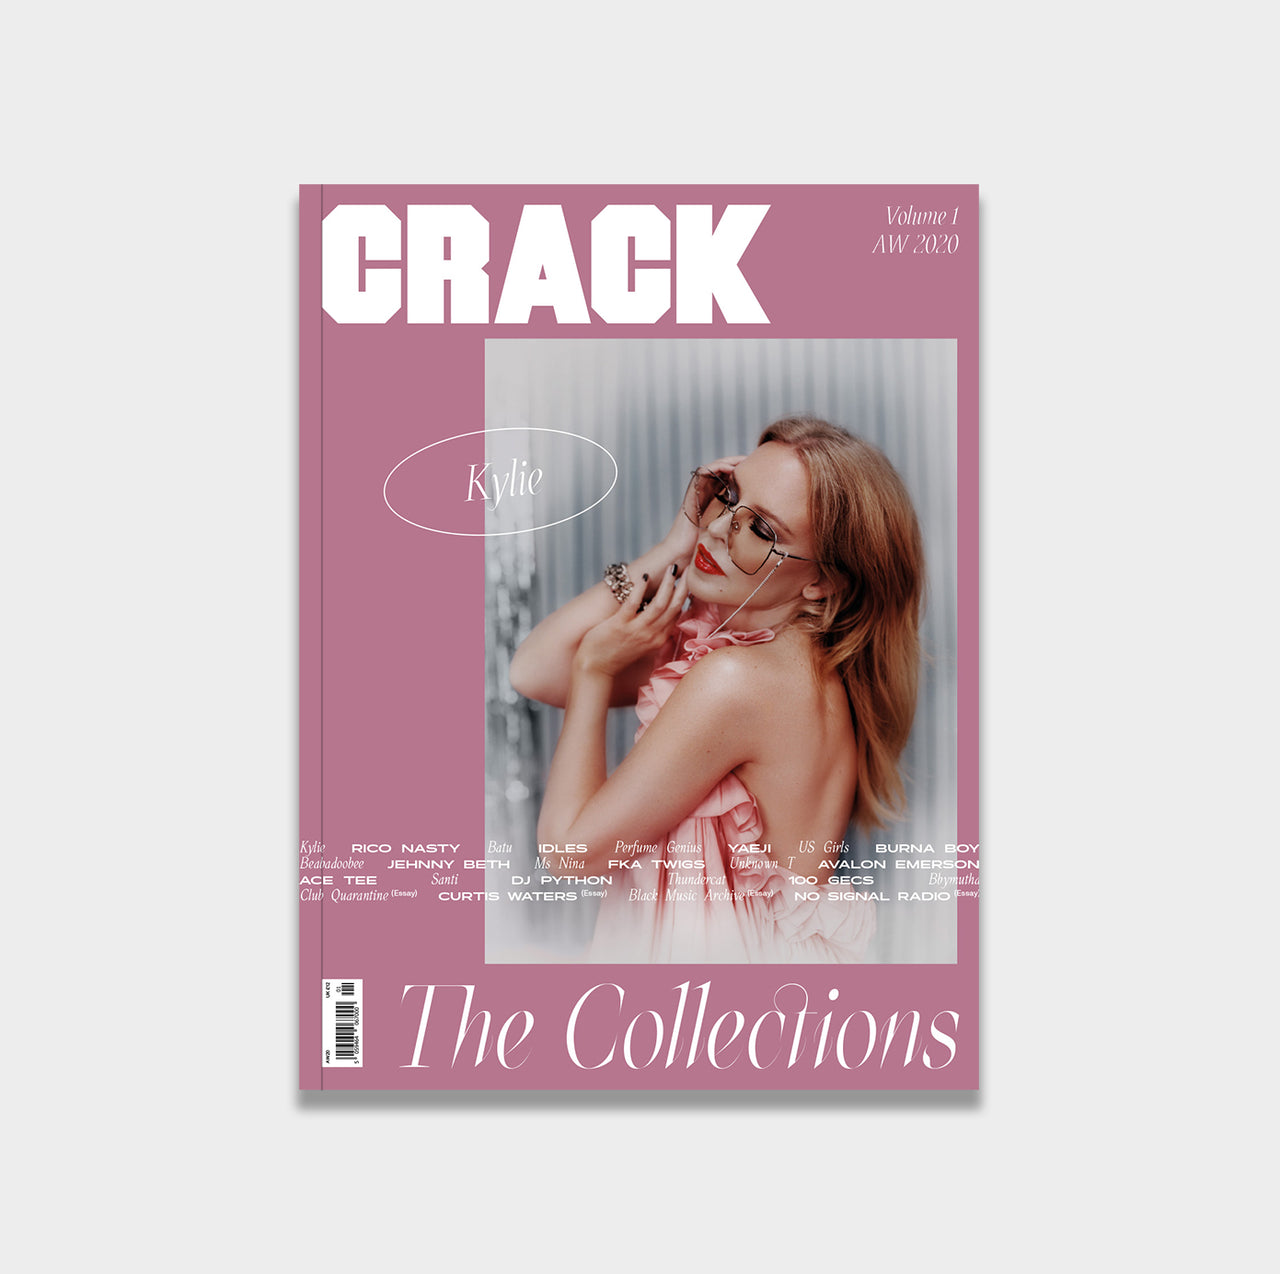 Crack Magazine: The Collections – Kylie